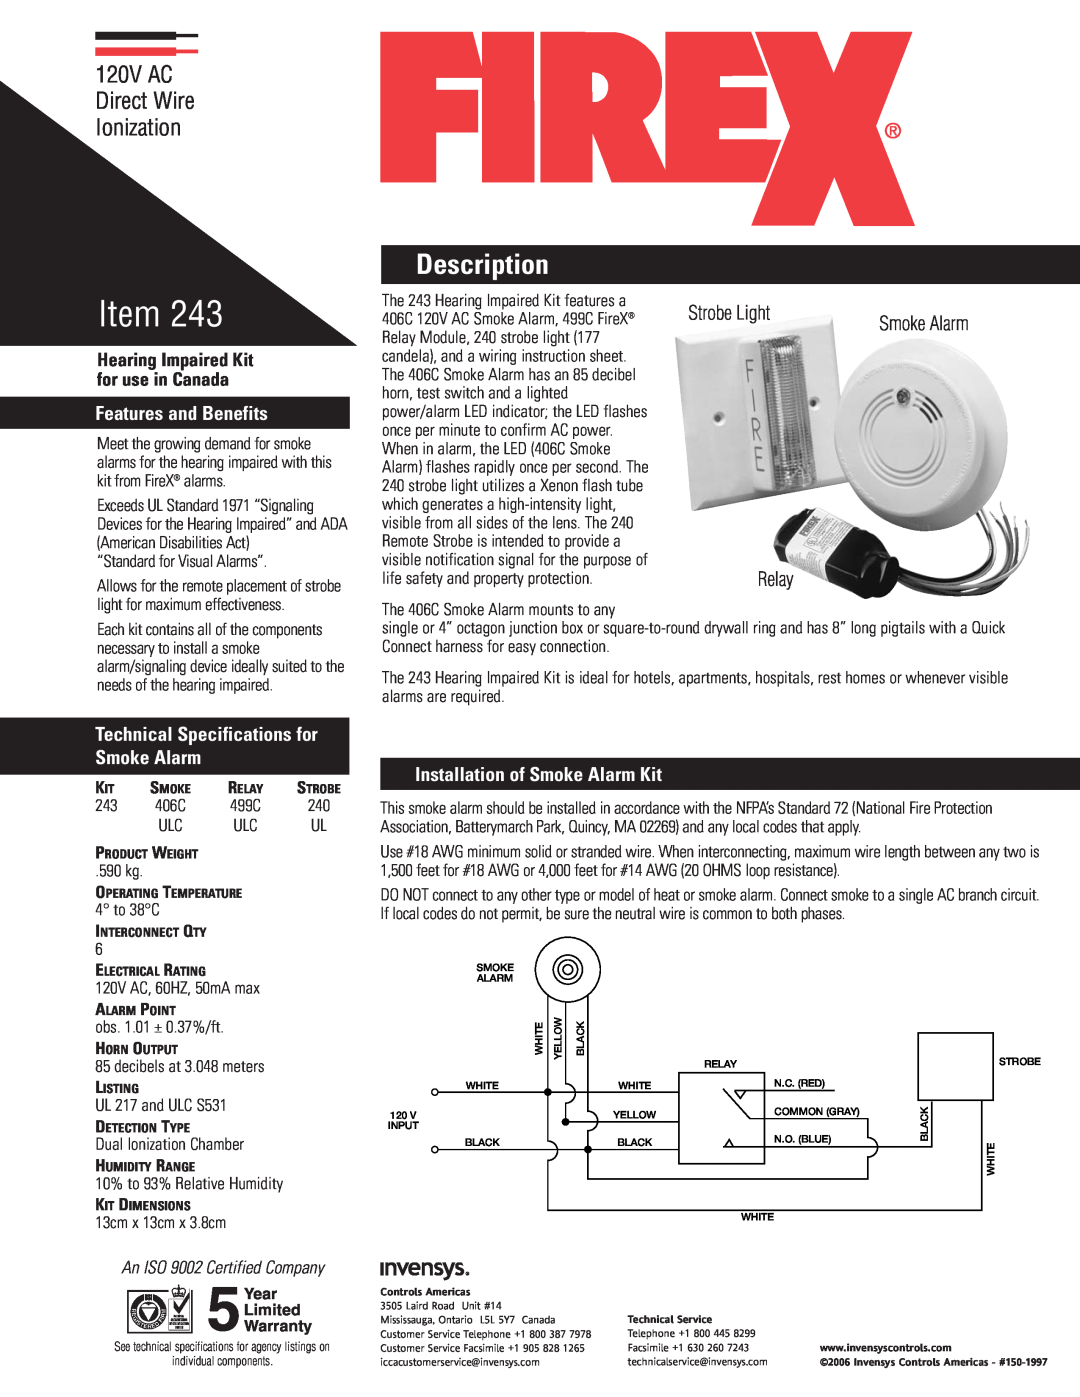 Firex 243 technical specifications Description, Features and Benefits, Installation of Smoke Alarm Kit, Strobe Light 